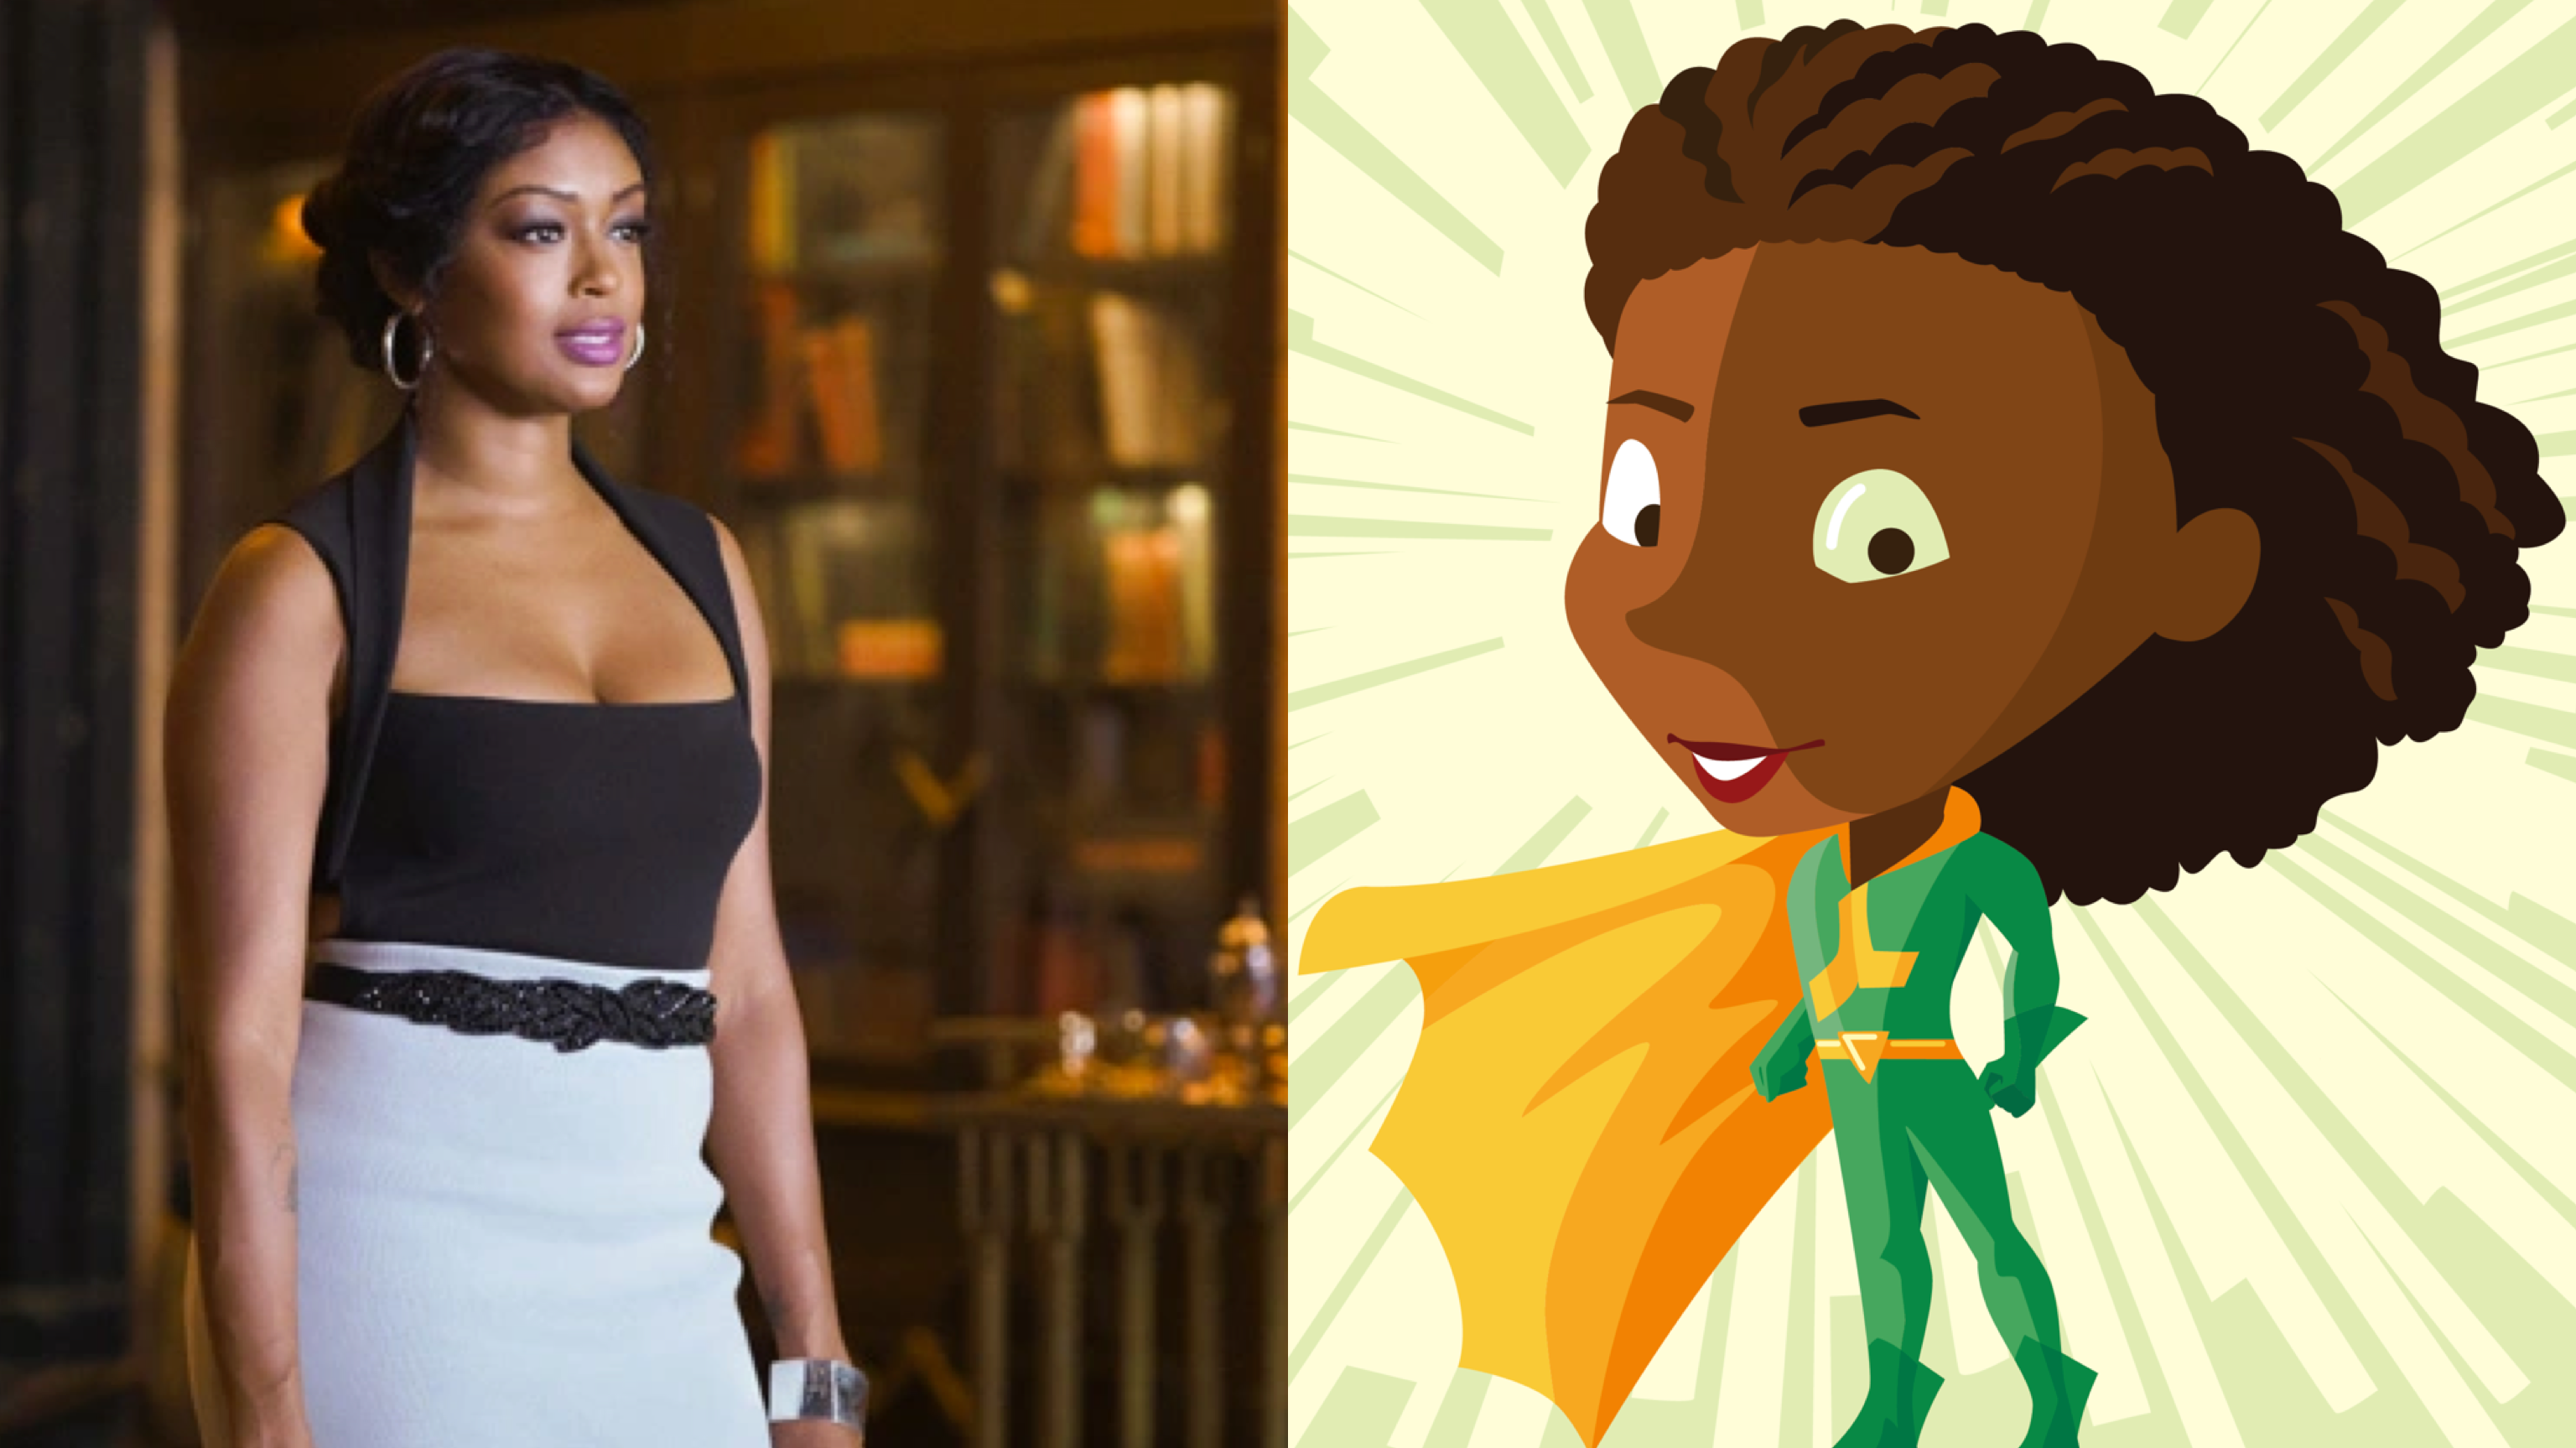 Javicia Leslie in Batwoman and as a Puffs Power Pal